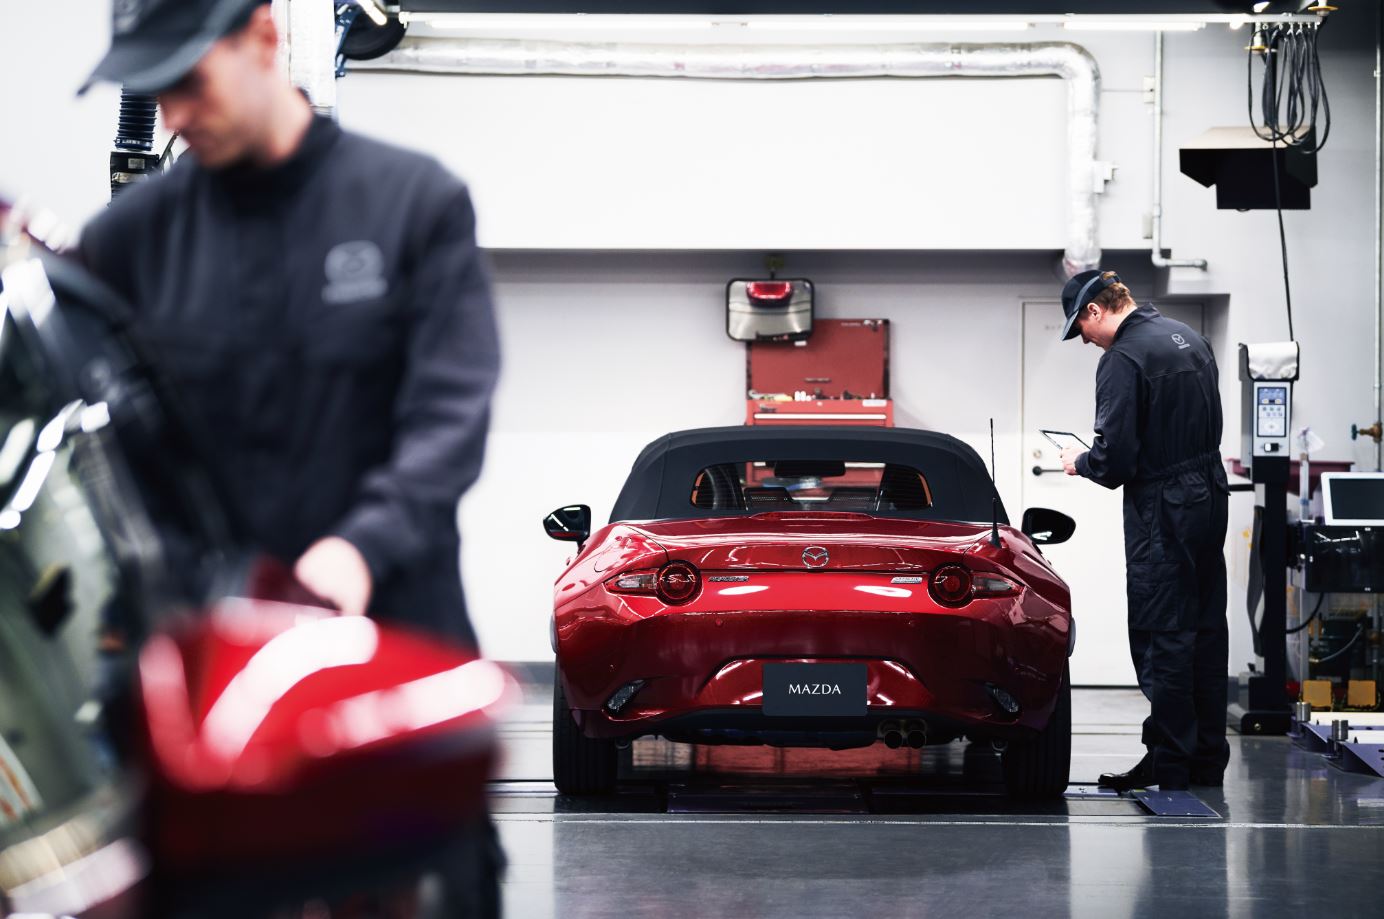 How can one get Mazda service specials in the Bay Area?